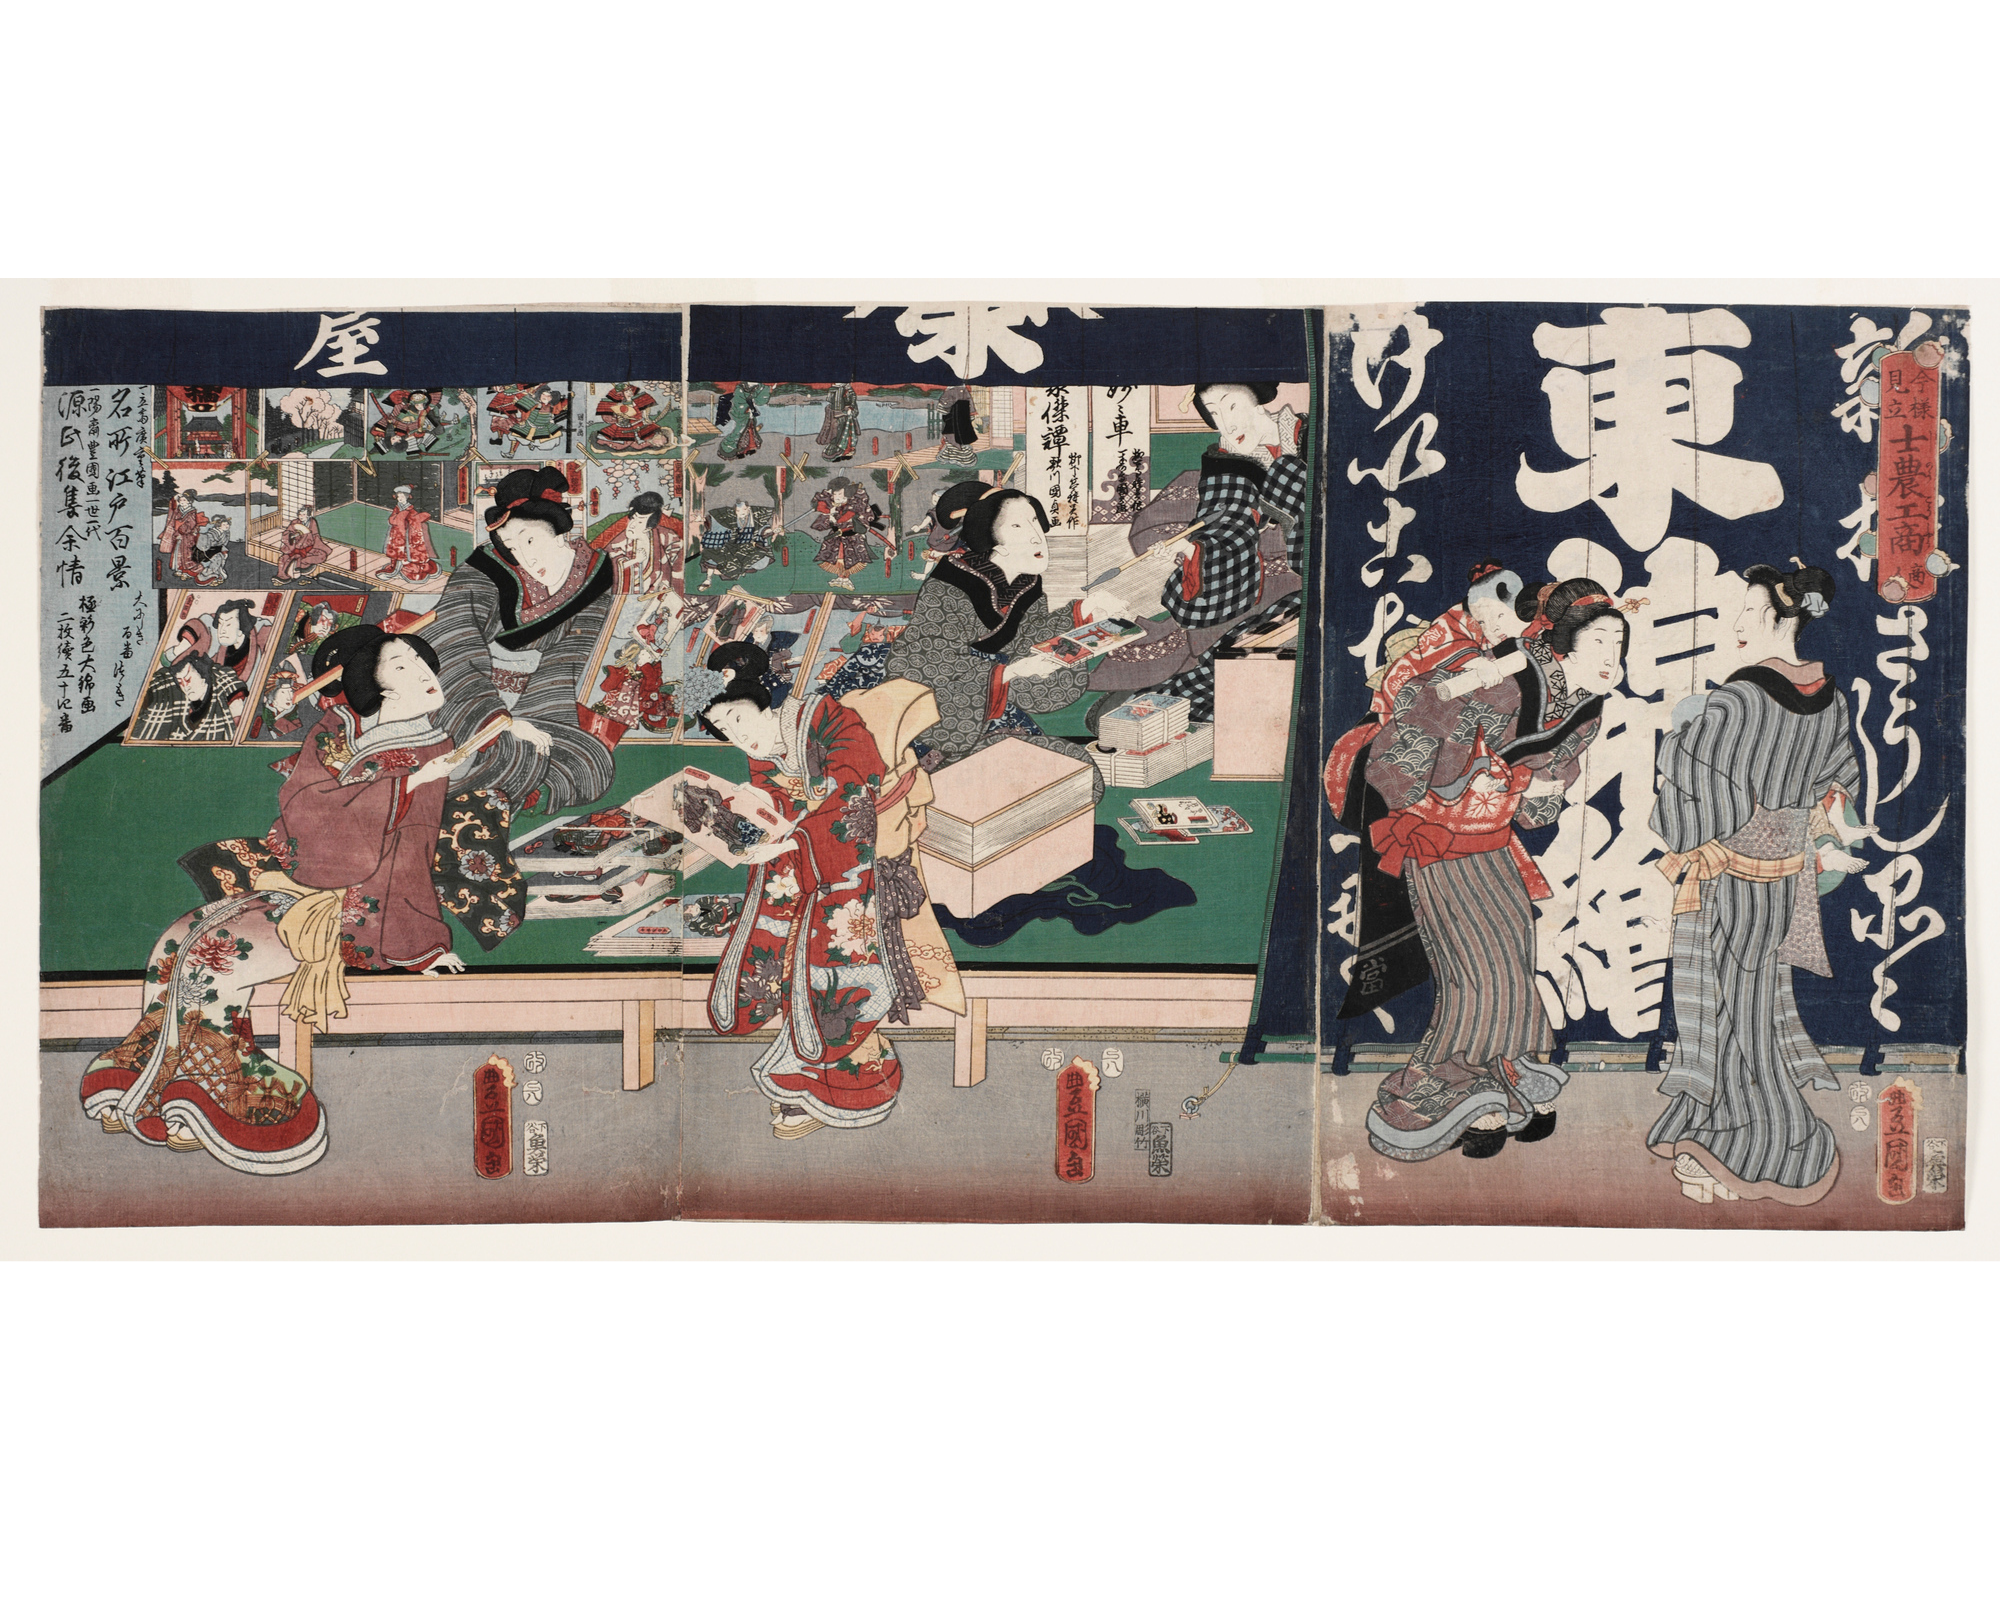 Utagawa Toyokuni III, Japanese (1786-1865). Merchant from series of the Four Classes of Society, 1857, woodcut printed in color on paper, Transfer from Hillyer Art Library, SC 1980.23.1